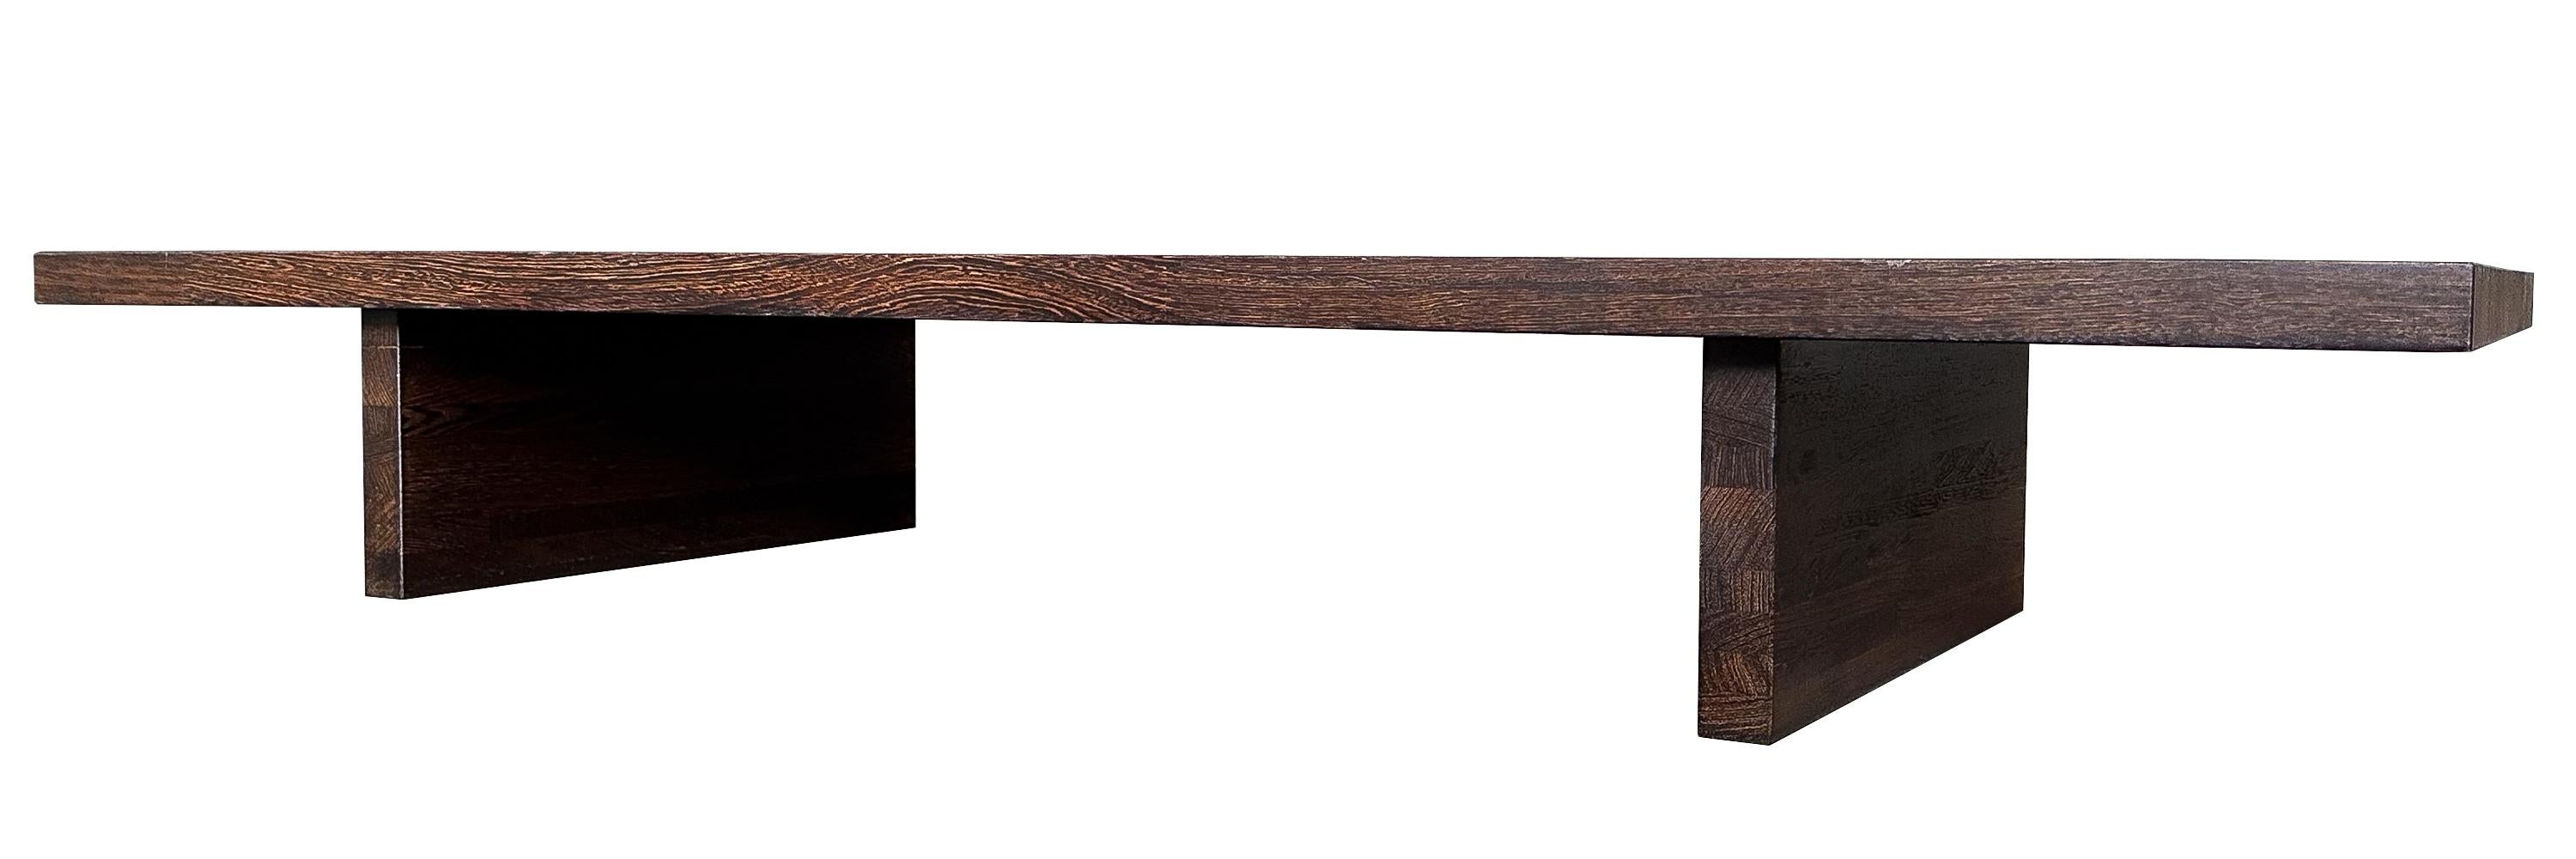 Minimalist Modern Solid Wenge Wood Low Coffee Table For Sale 1